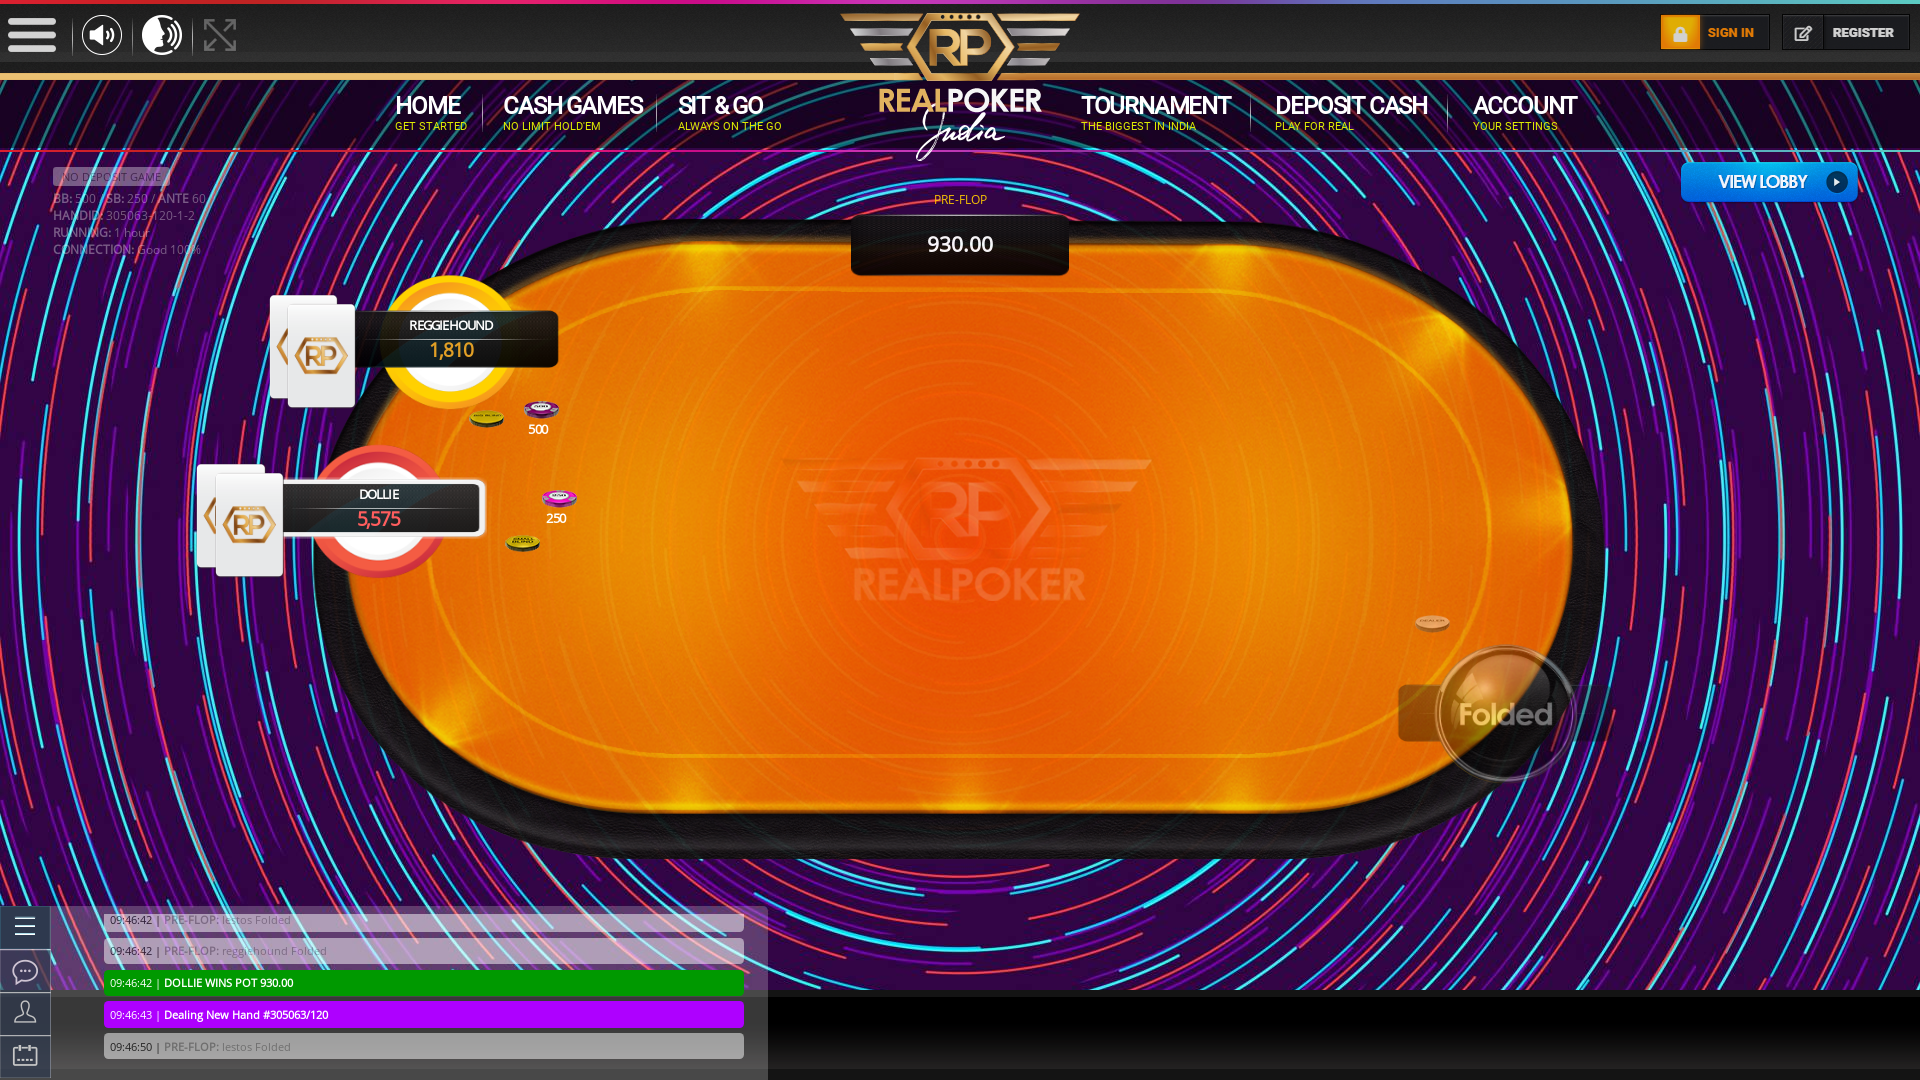 Indian online poker on a 10 player table in the 68th minute match up